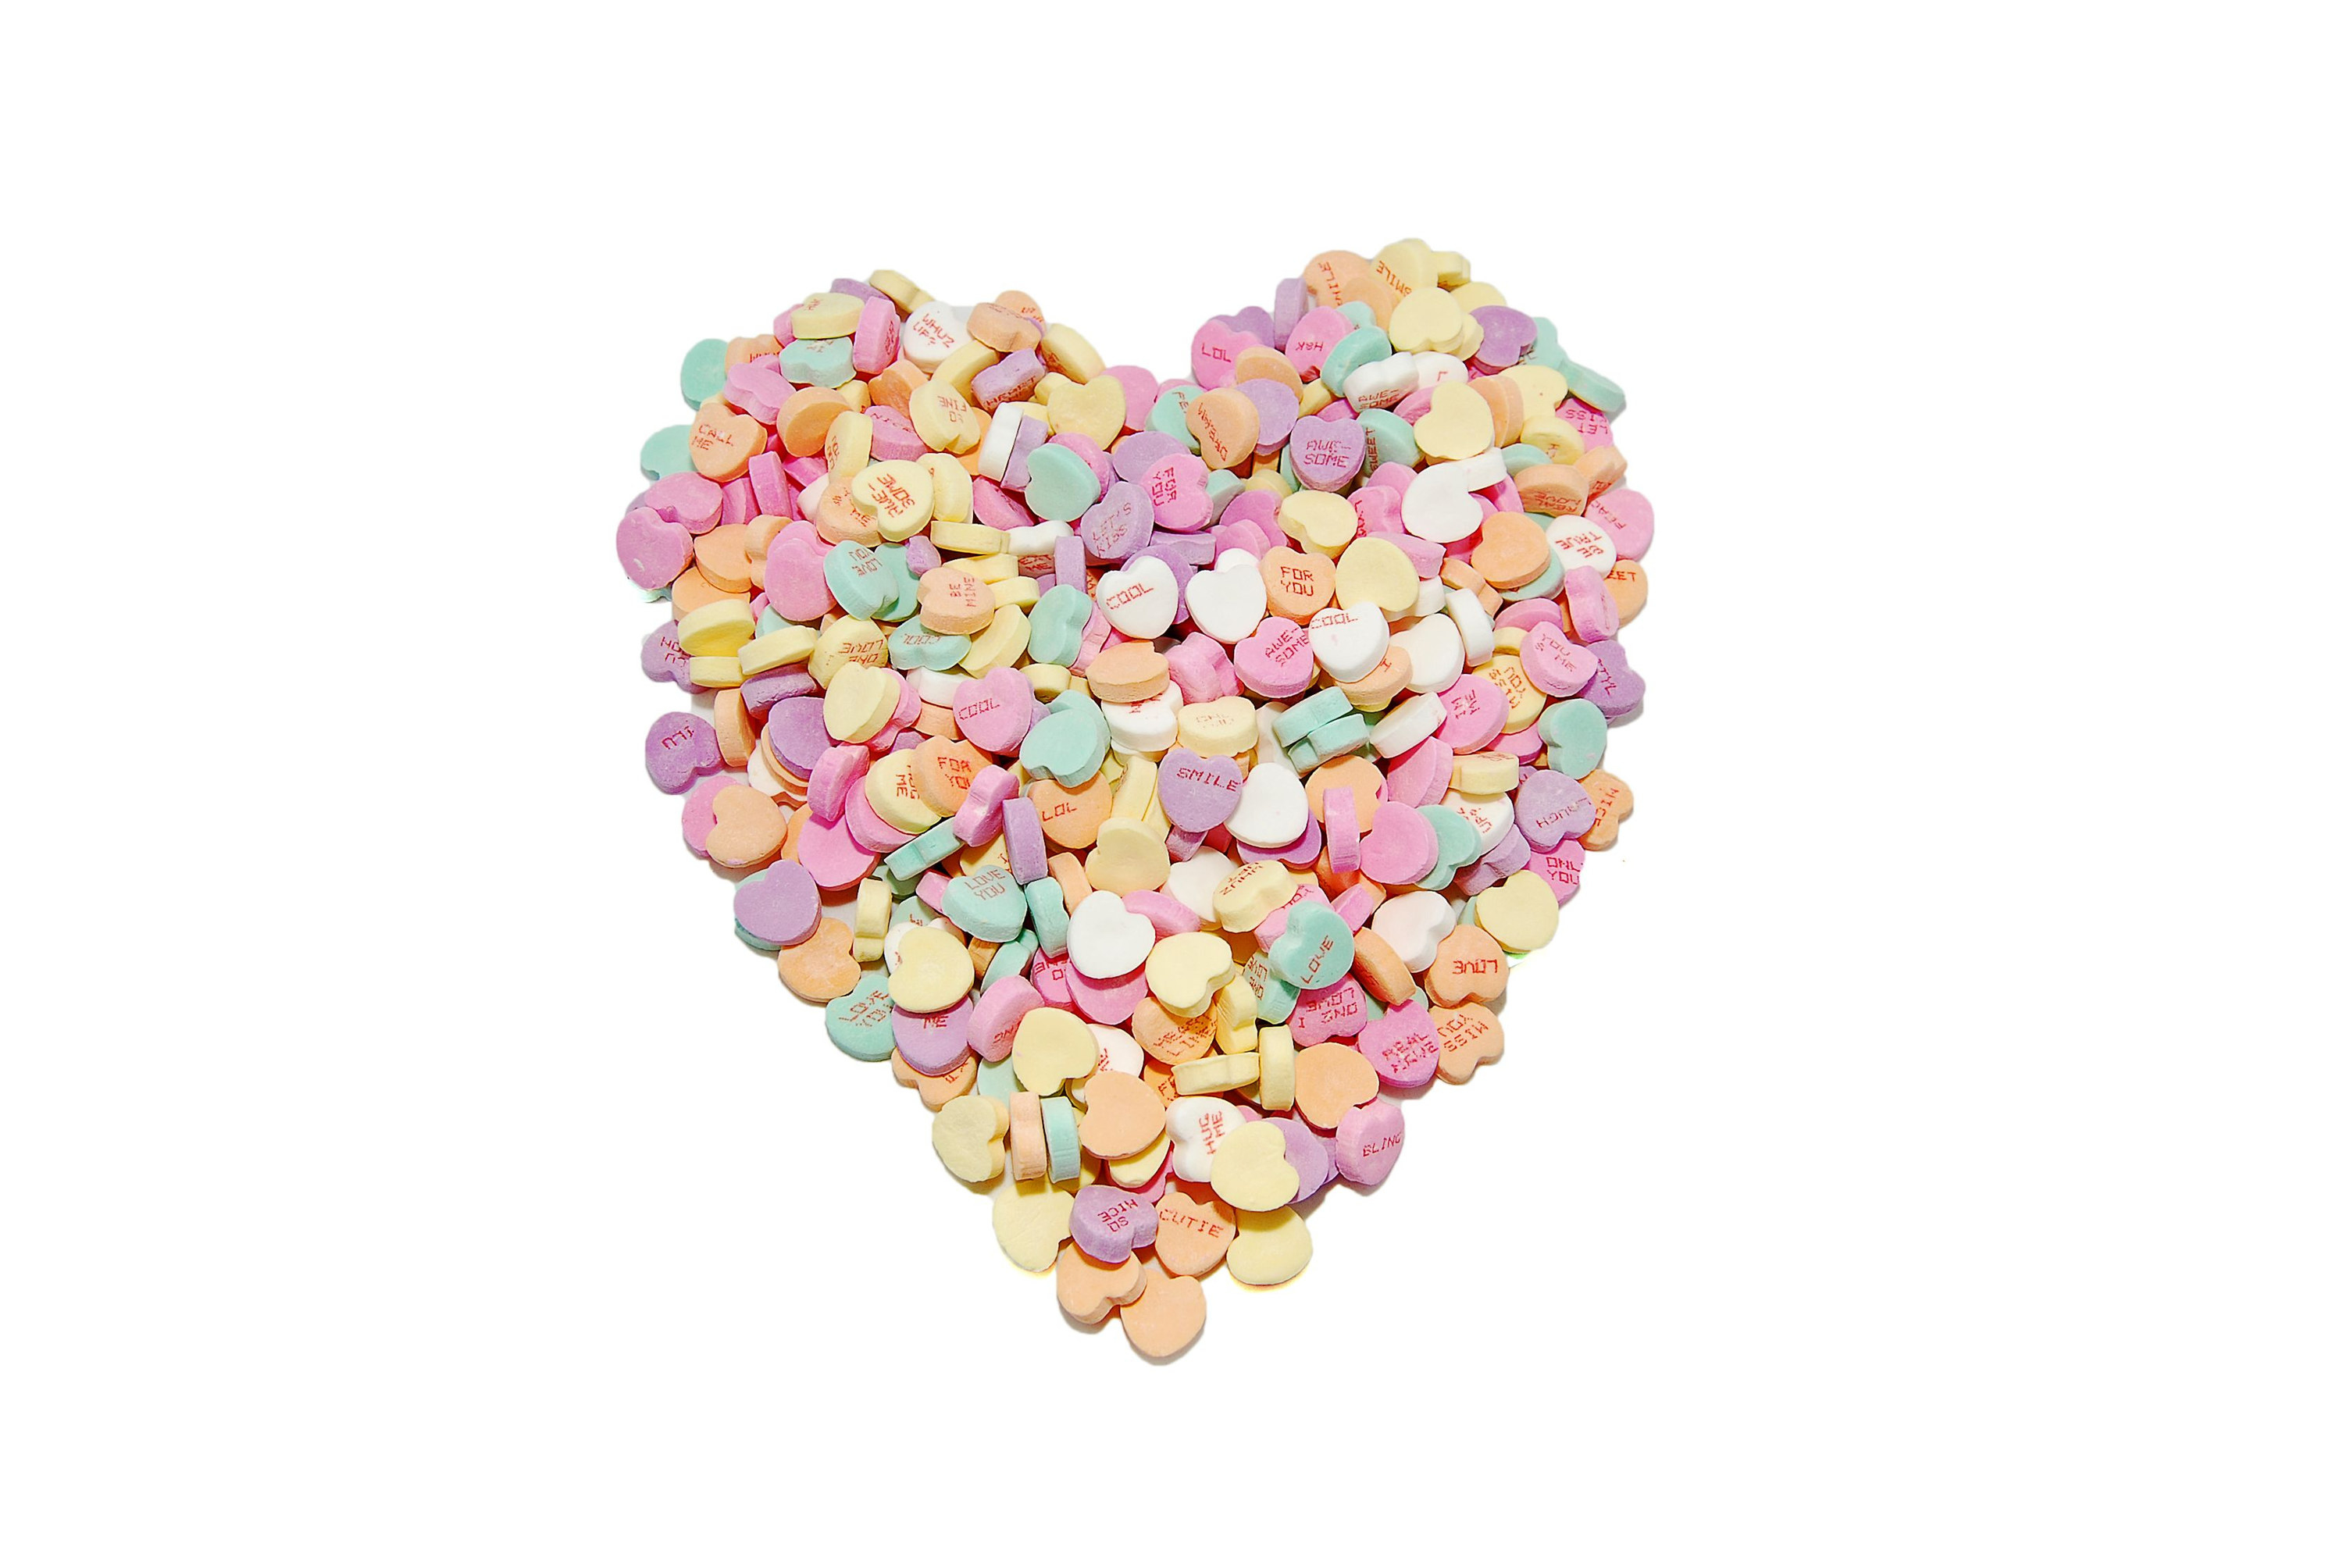 Candy hearts in the shape of a heart